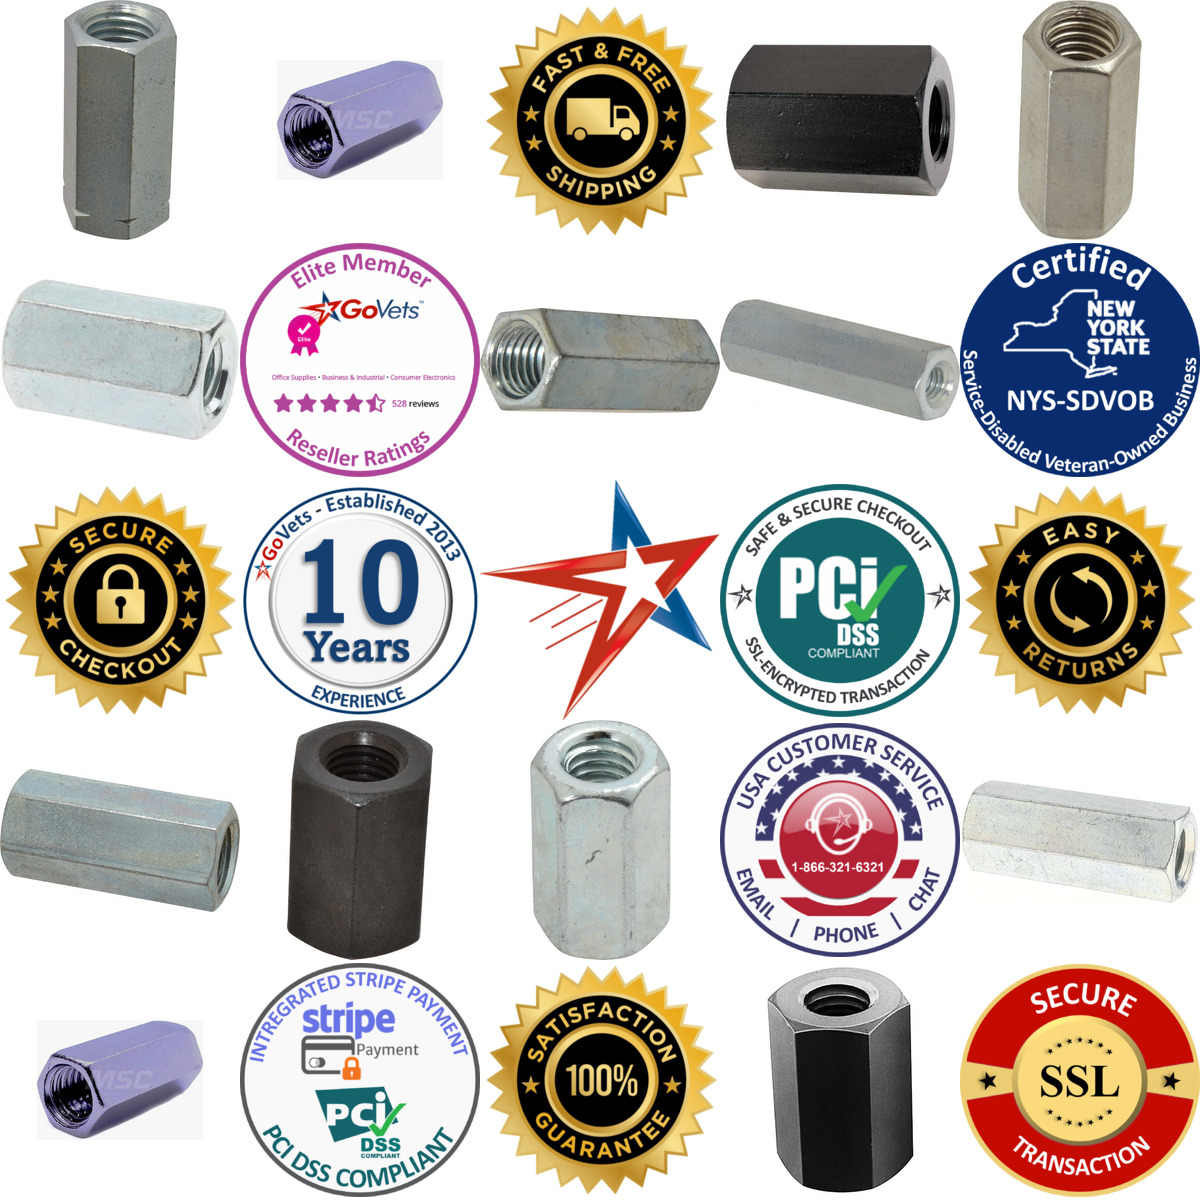 A selection of Coupling Nuts products on GoVets